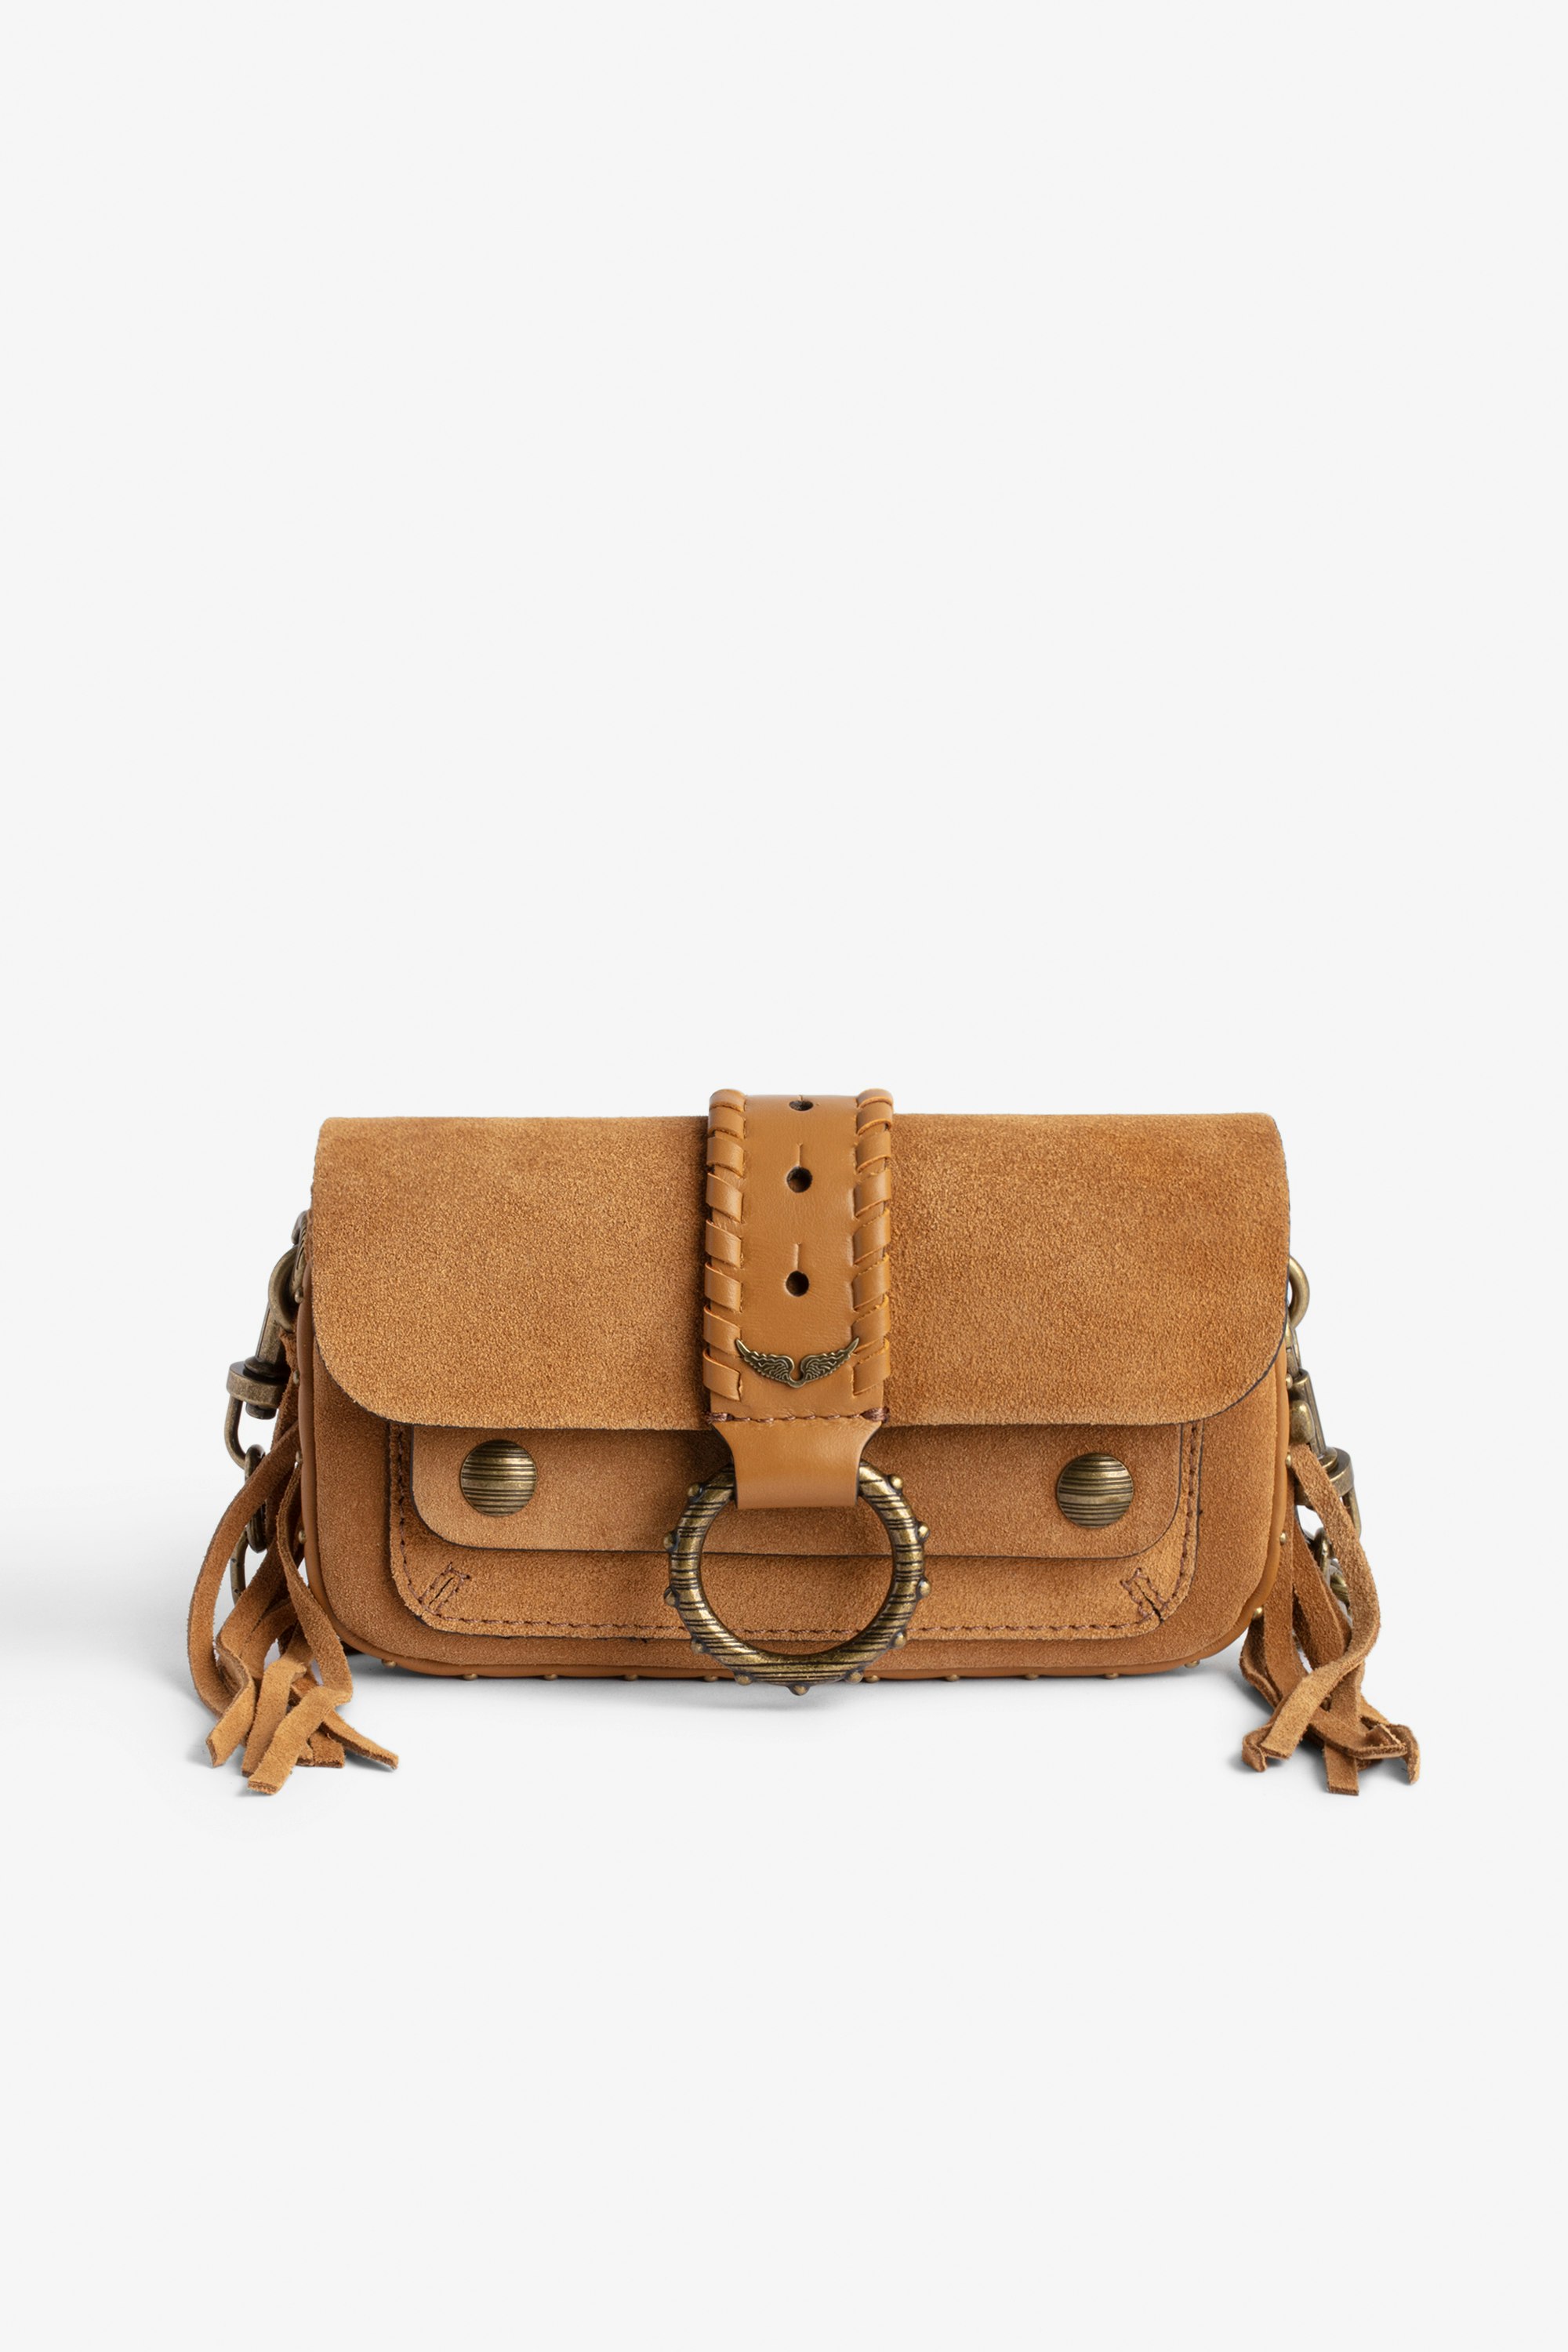 Kate Wallet Bag Women's small bag in camel fringed suede